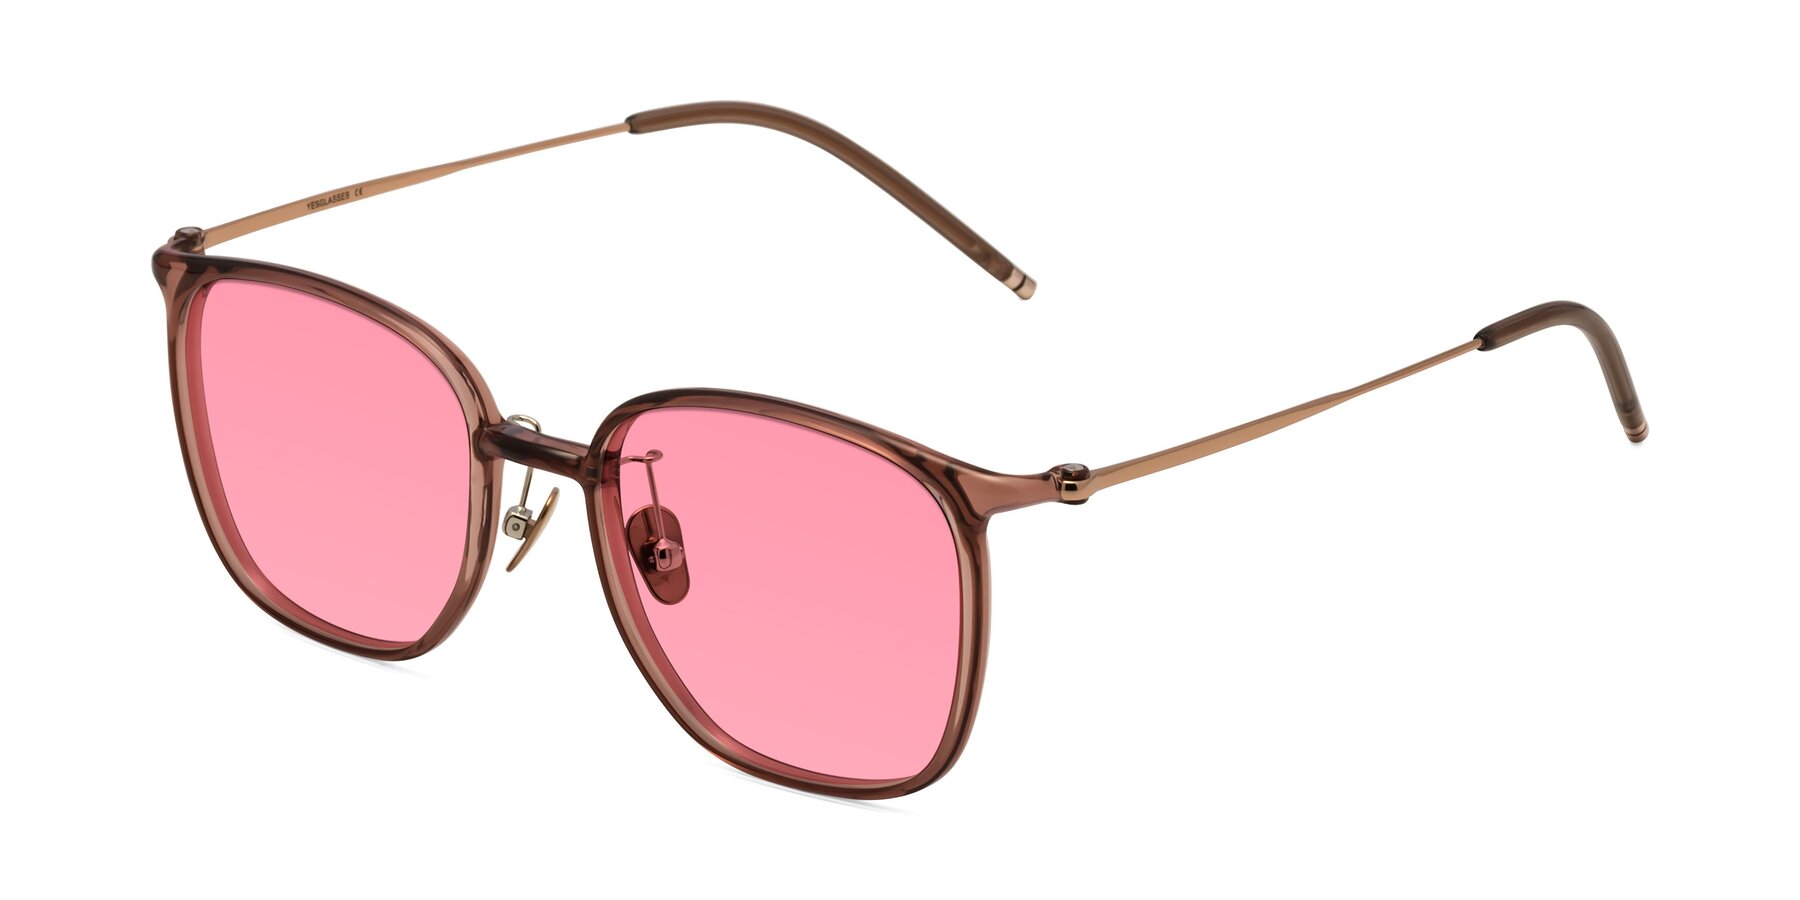 Angle of Manlius in Redwood with Pink Tinted Lenses